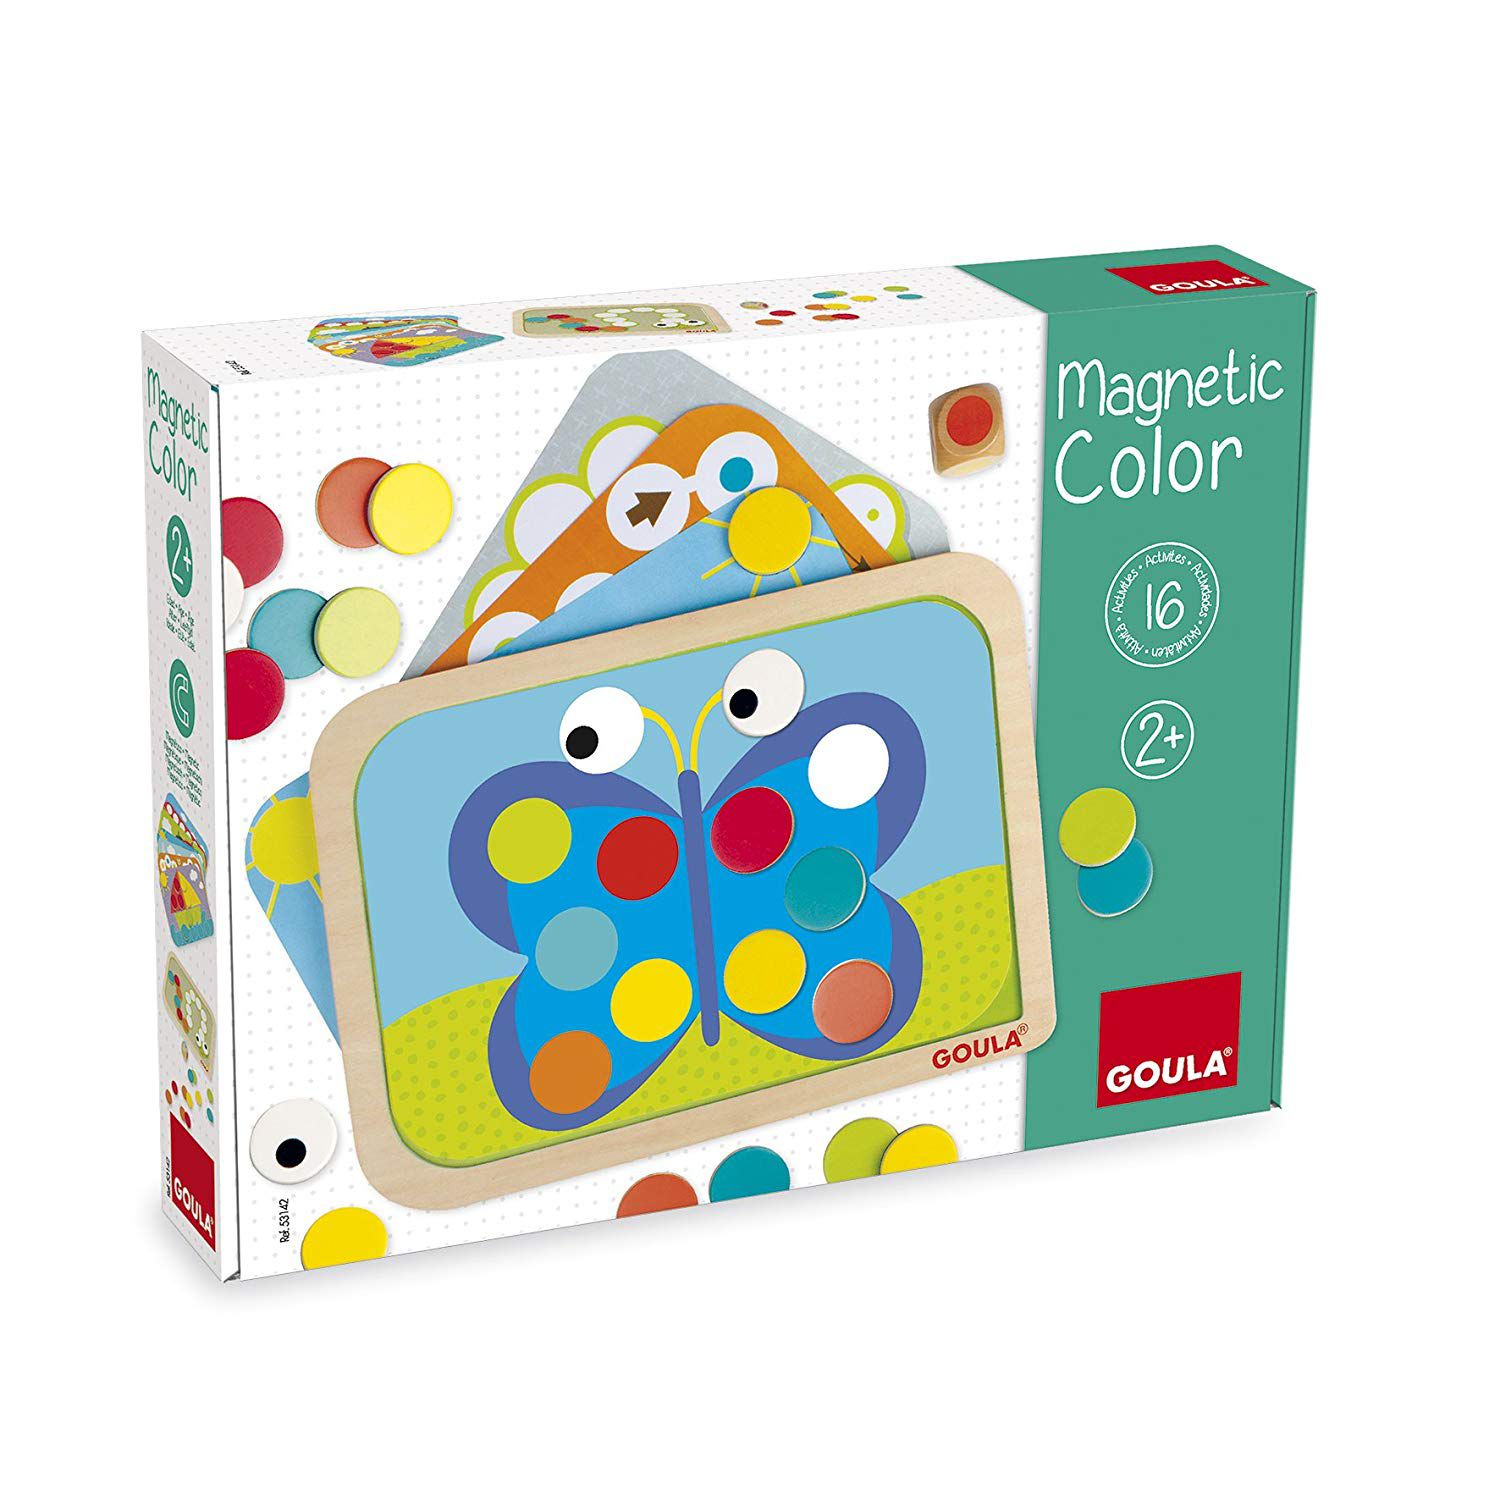 Magnetic Color Goula